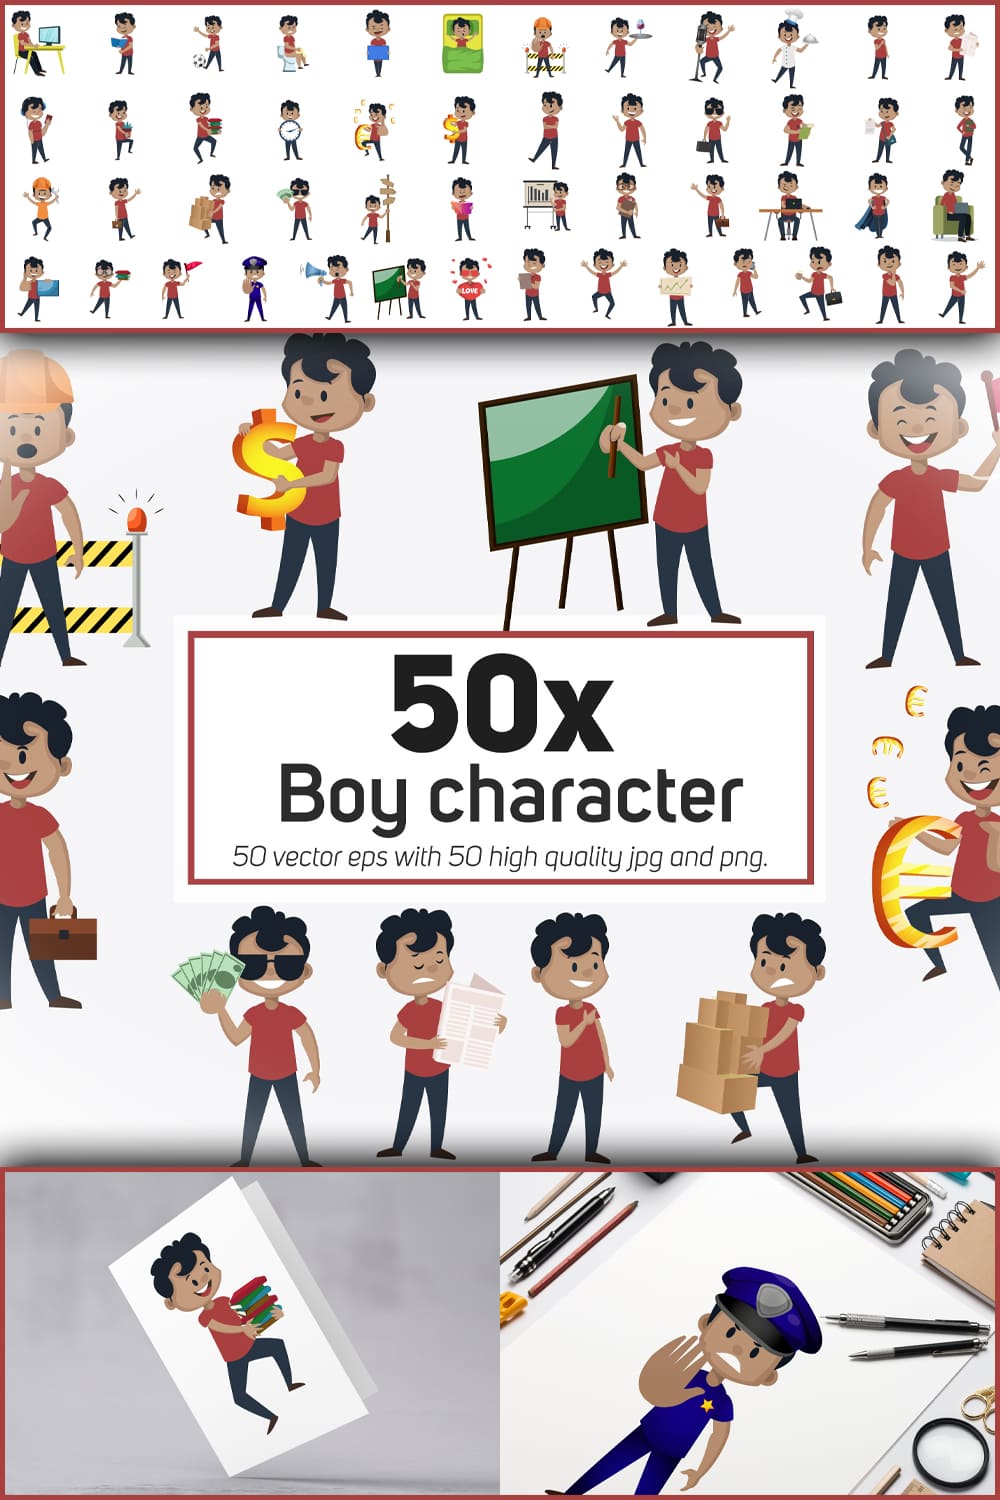 541636 50x boy character in different situation collectio pinterest 1000 1500 559